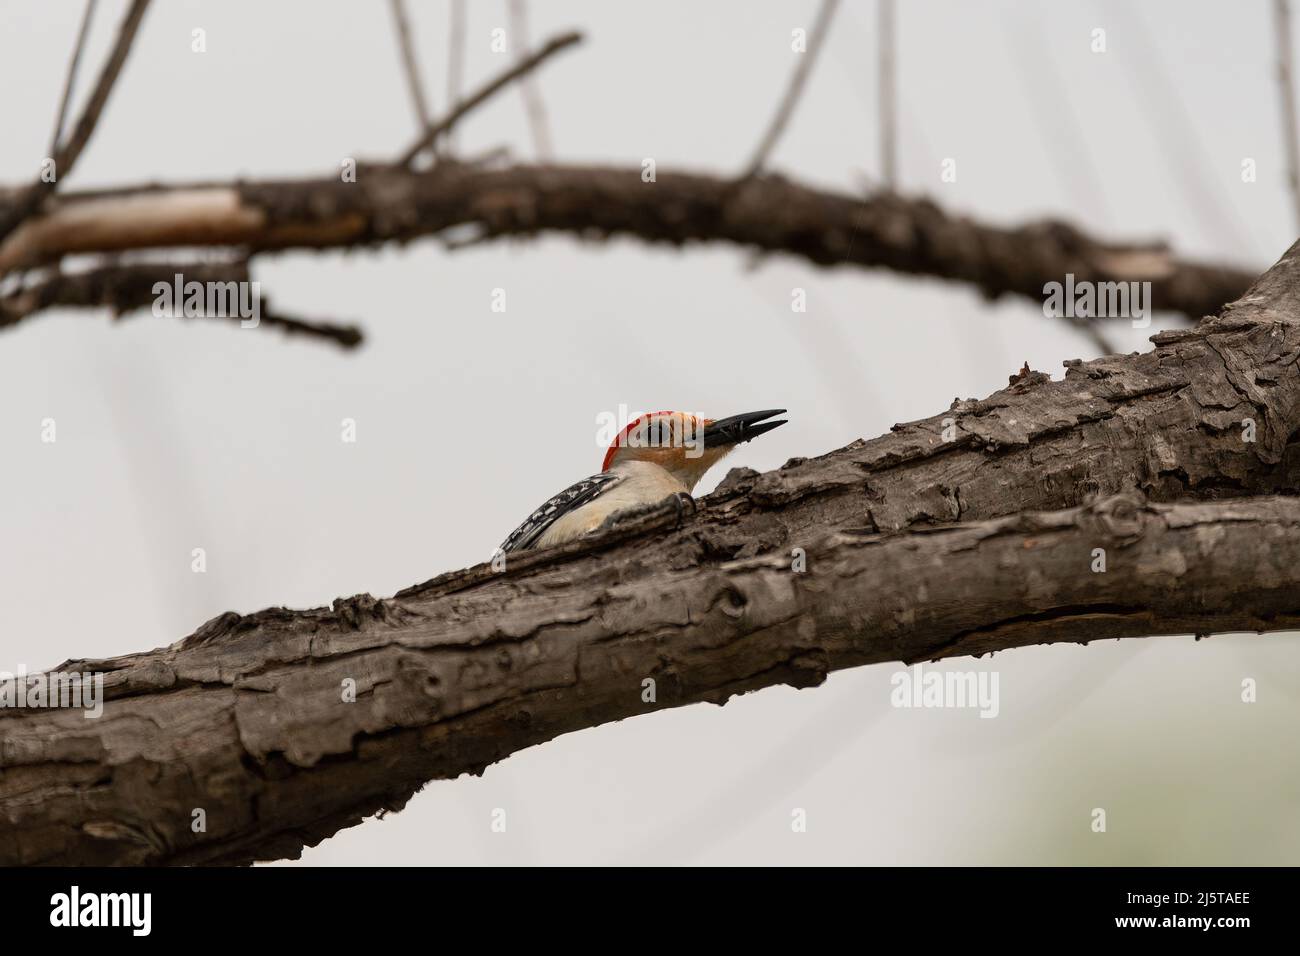 A male Red-bellied Woodpecker peeking out from behind a tree branch while holding an insect in its beak on a spring morning. Stock Photo